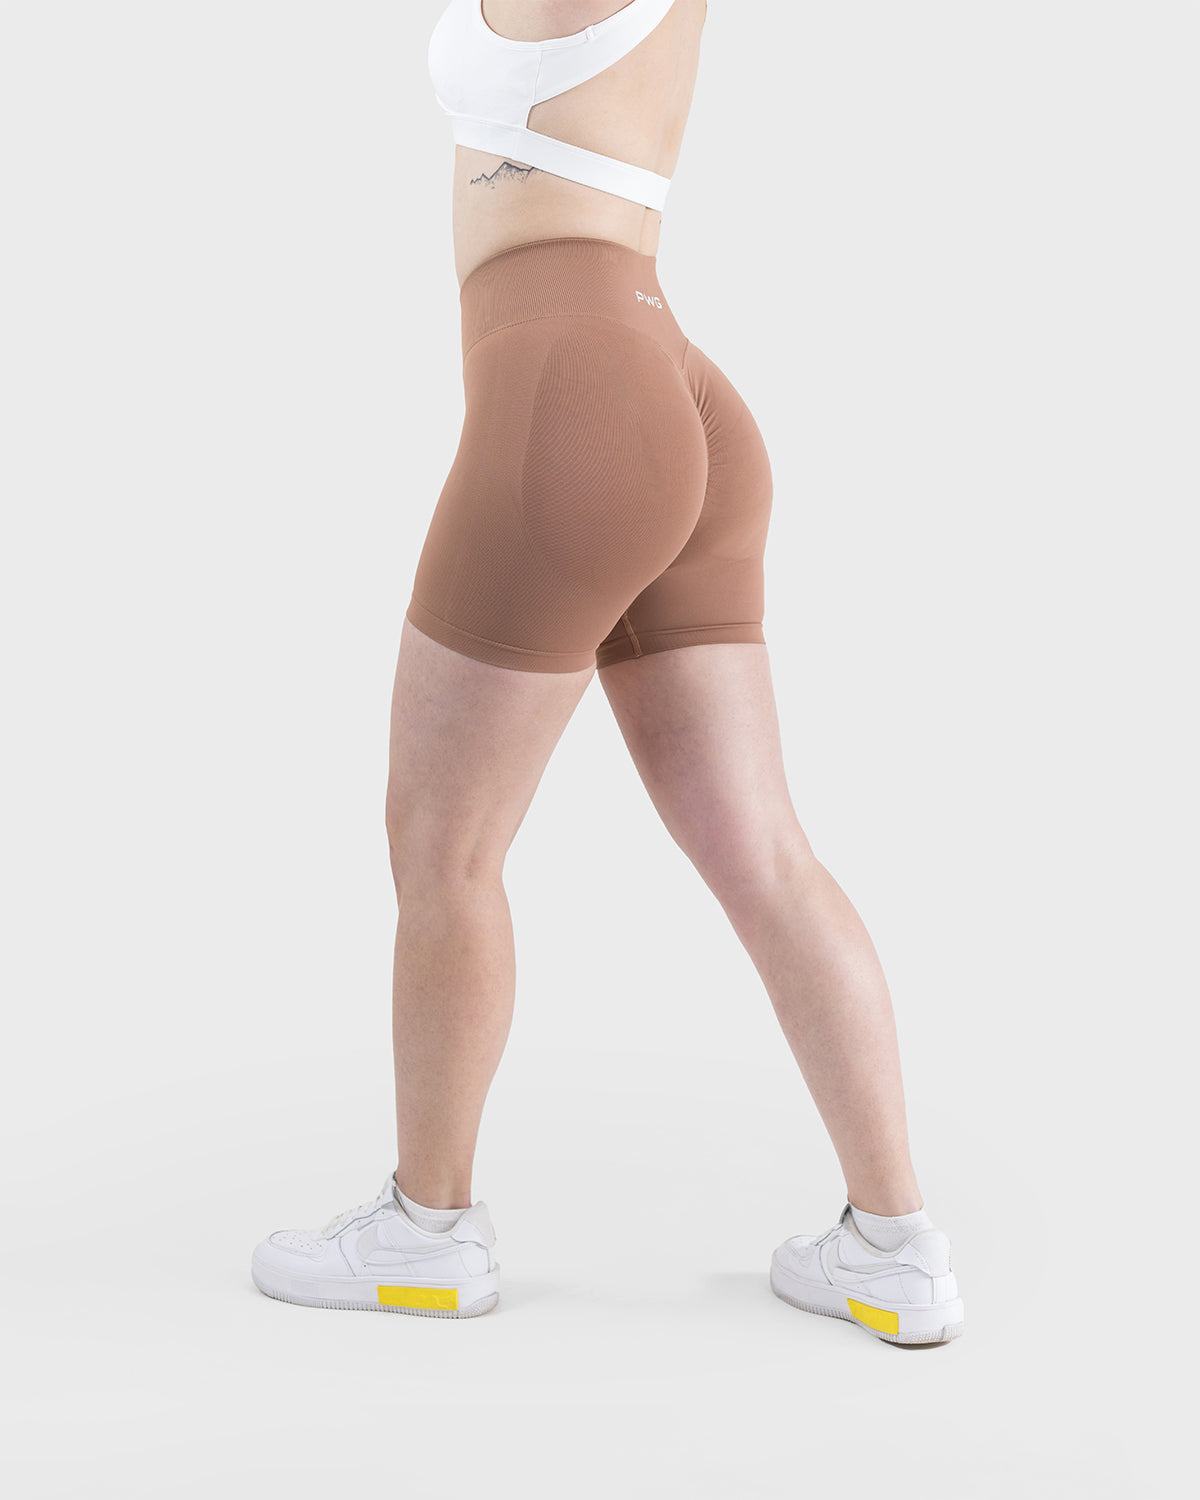 Form Sculpting Shorts - Maple Brown